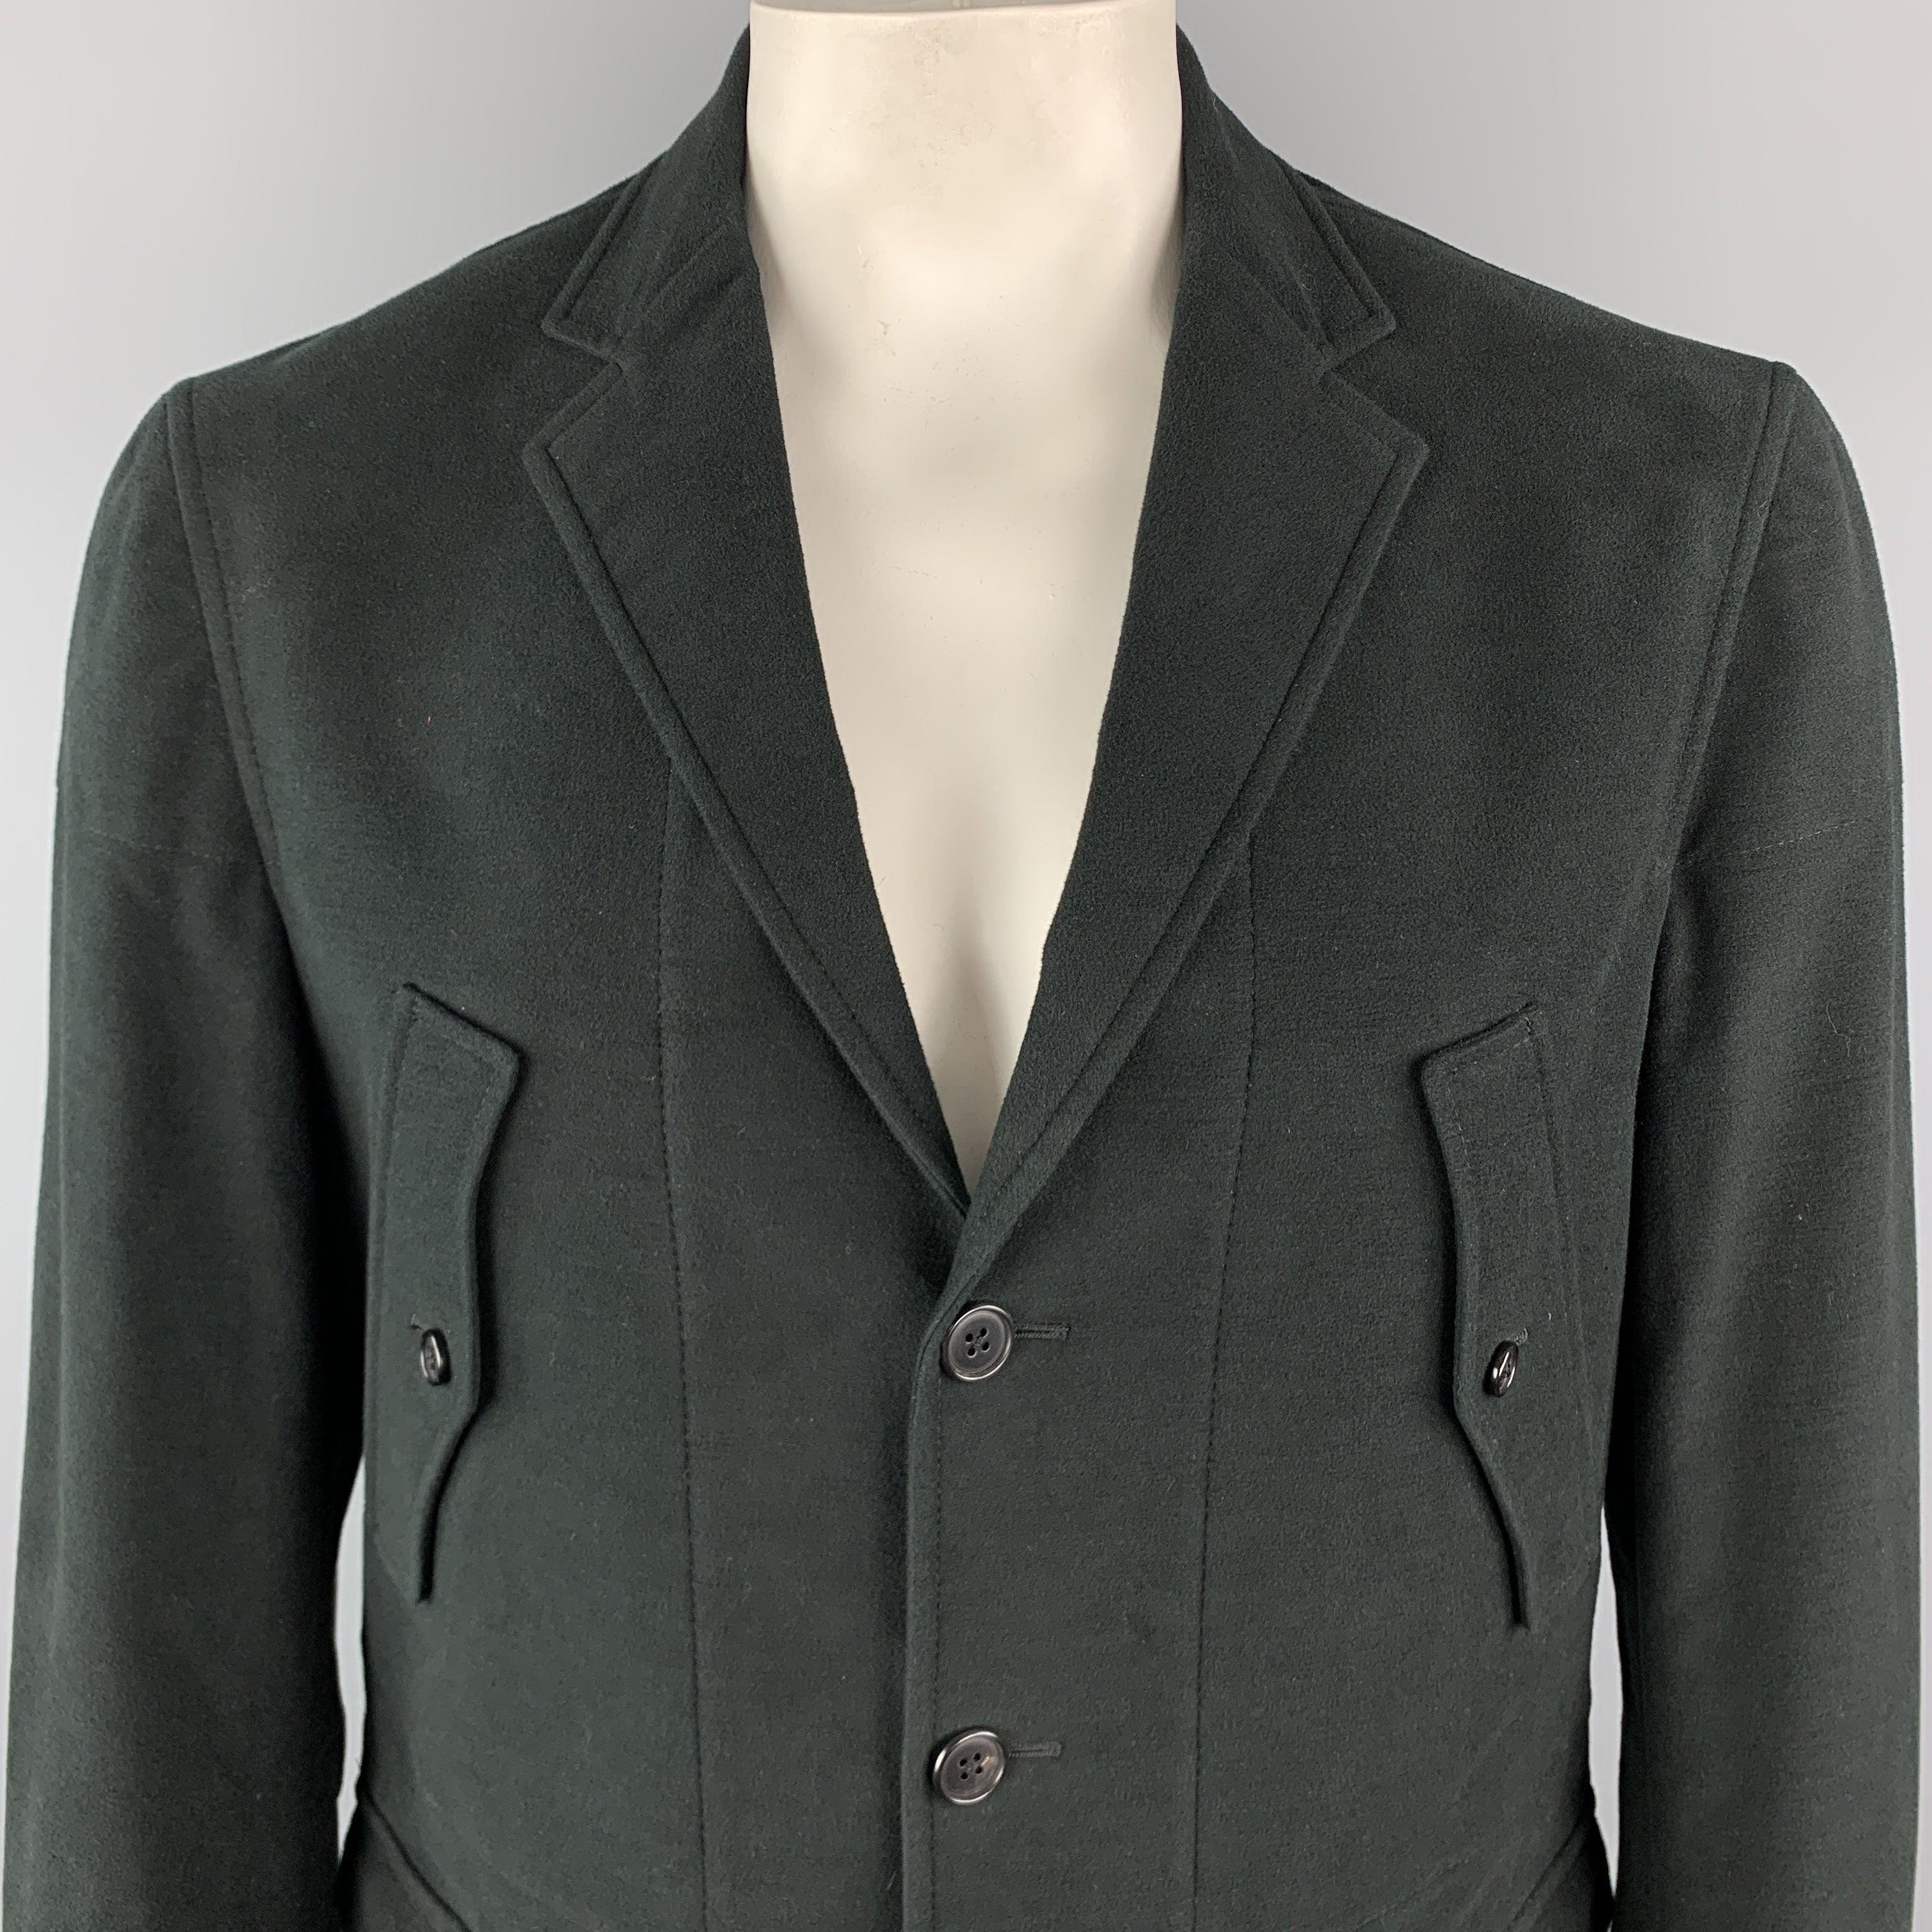 BELVEST Jacket comes in a black solid cotton / elastane material, with a notch lapel, patch pockets, three buttons at closure, single breasted, functional buttons and a leather trim at cuffs, elbow patches, a single vent at back, unlined. Made in